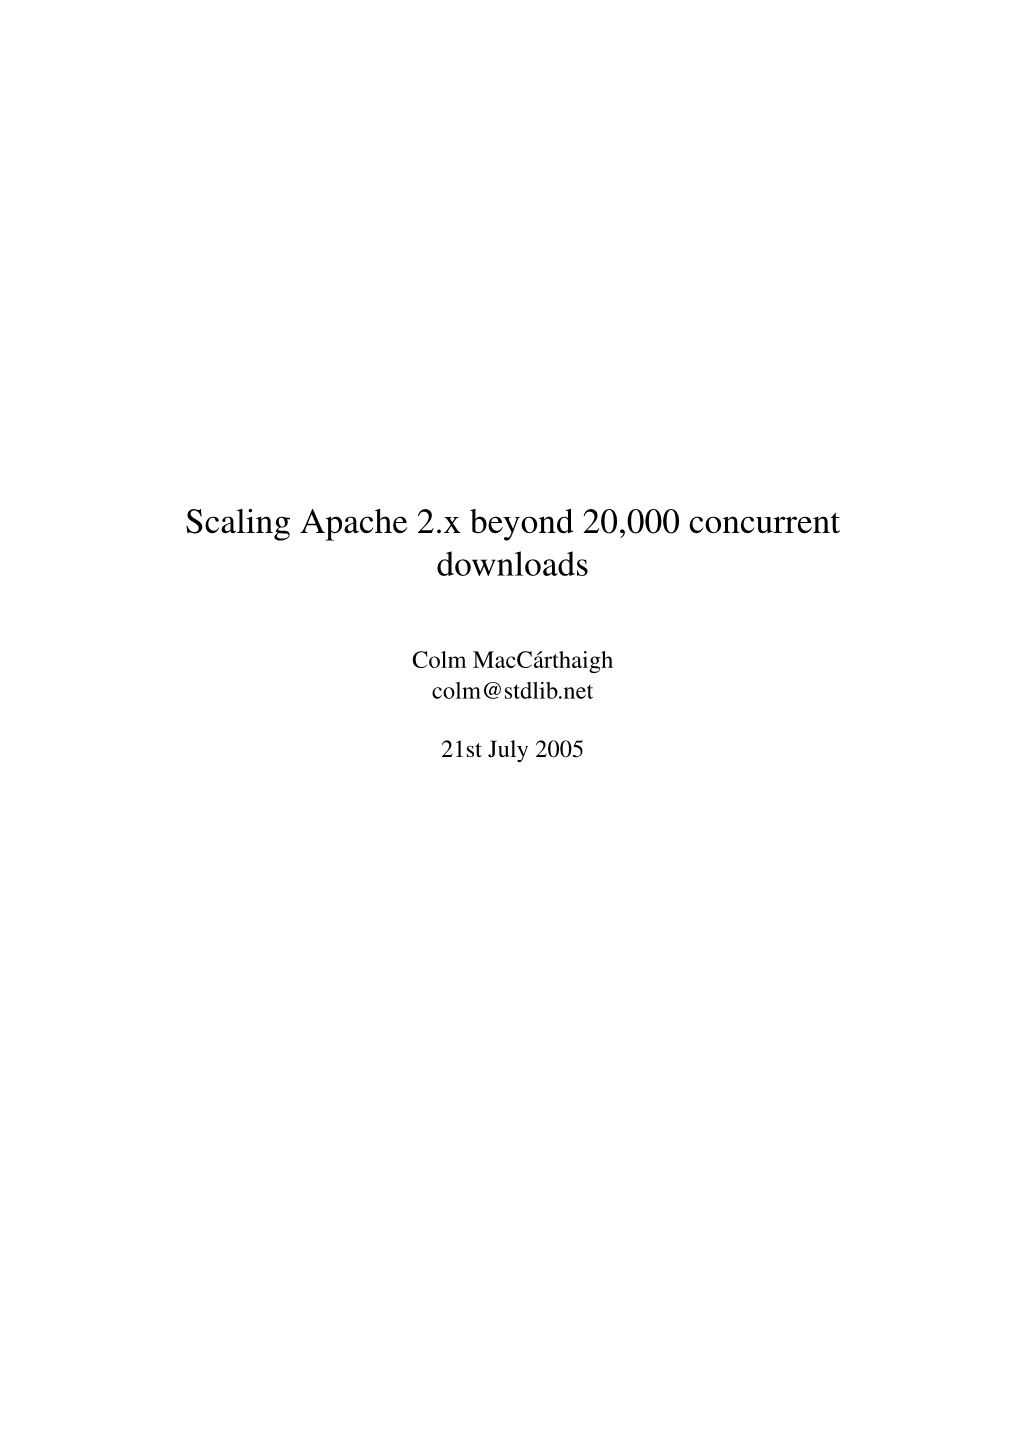 Scaling Apache 2.X Beyond 20,000 Concurrent Downloads